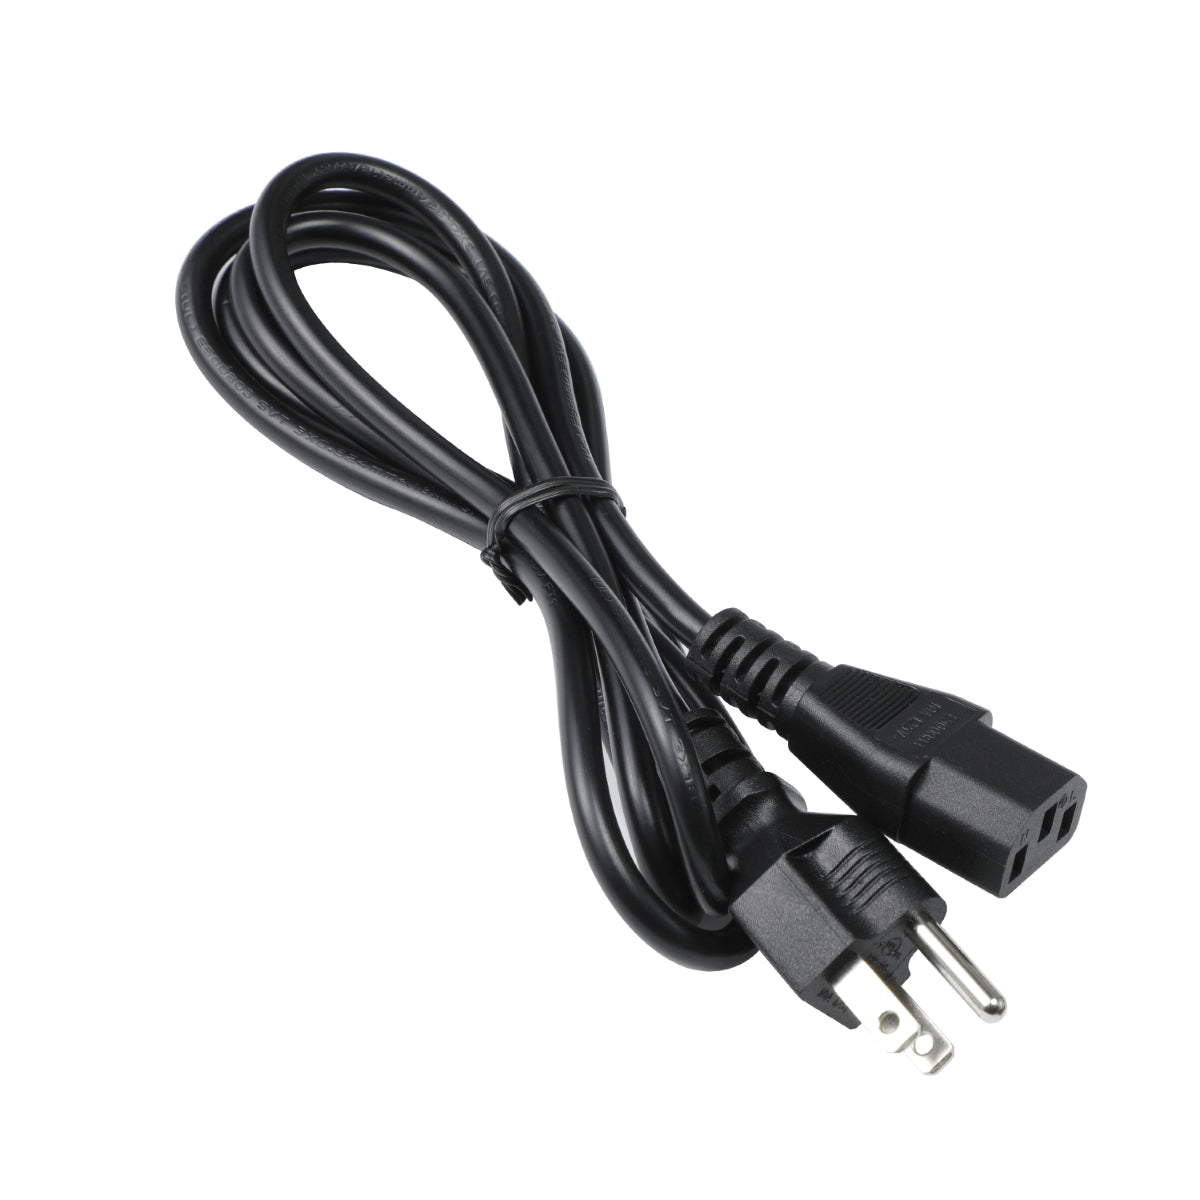 Power Cord for Acer KG251 Monitor.